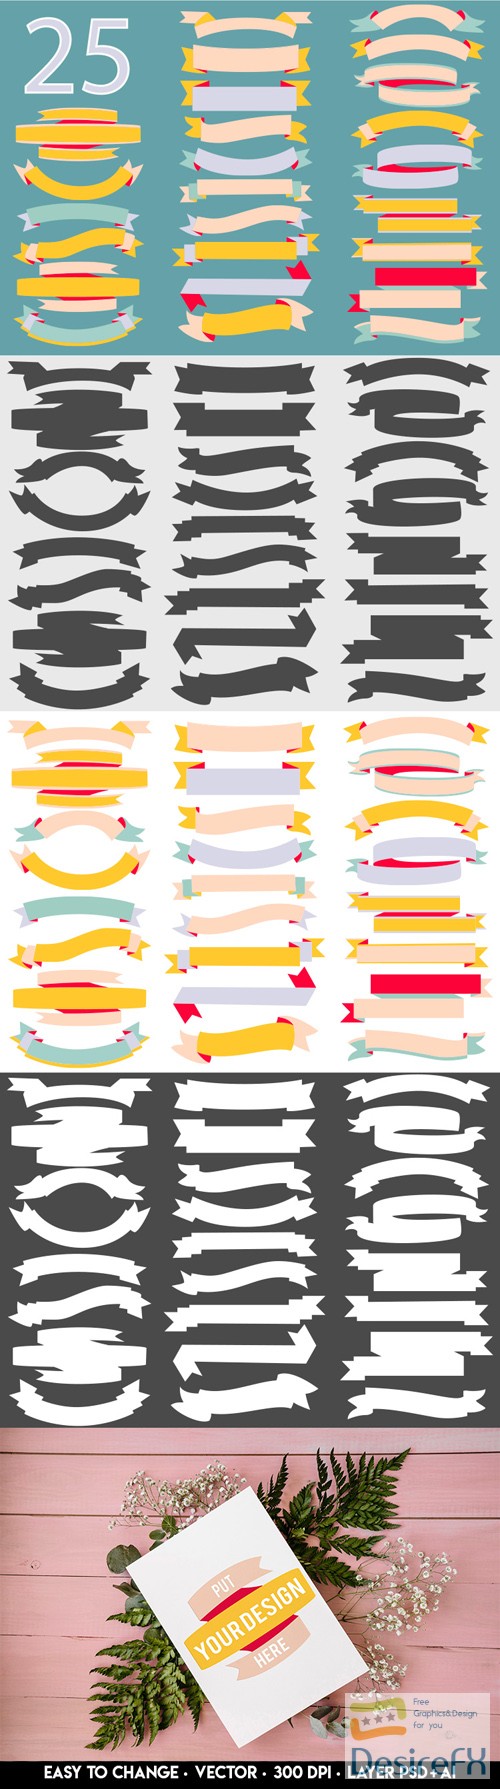 Ribbon &amp; Banners Vector Collection [Ai/PSD]